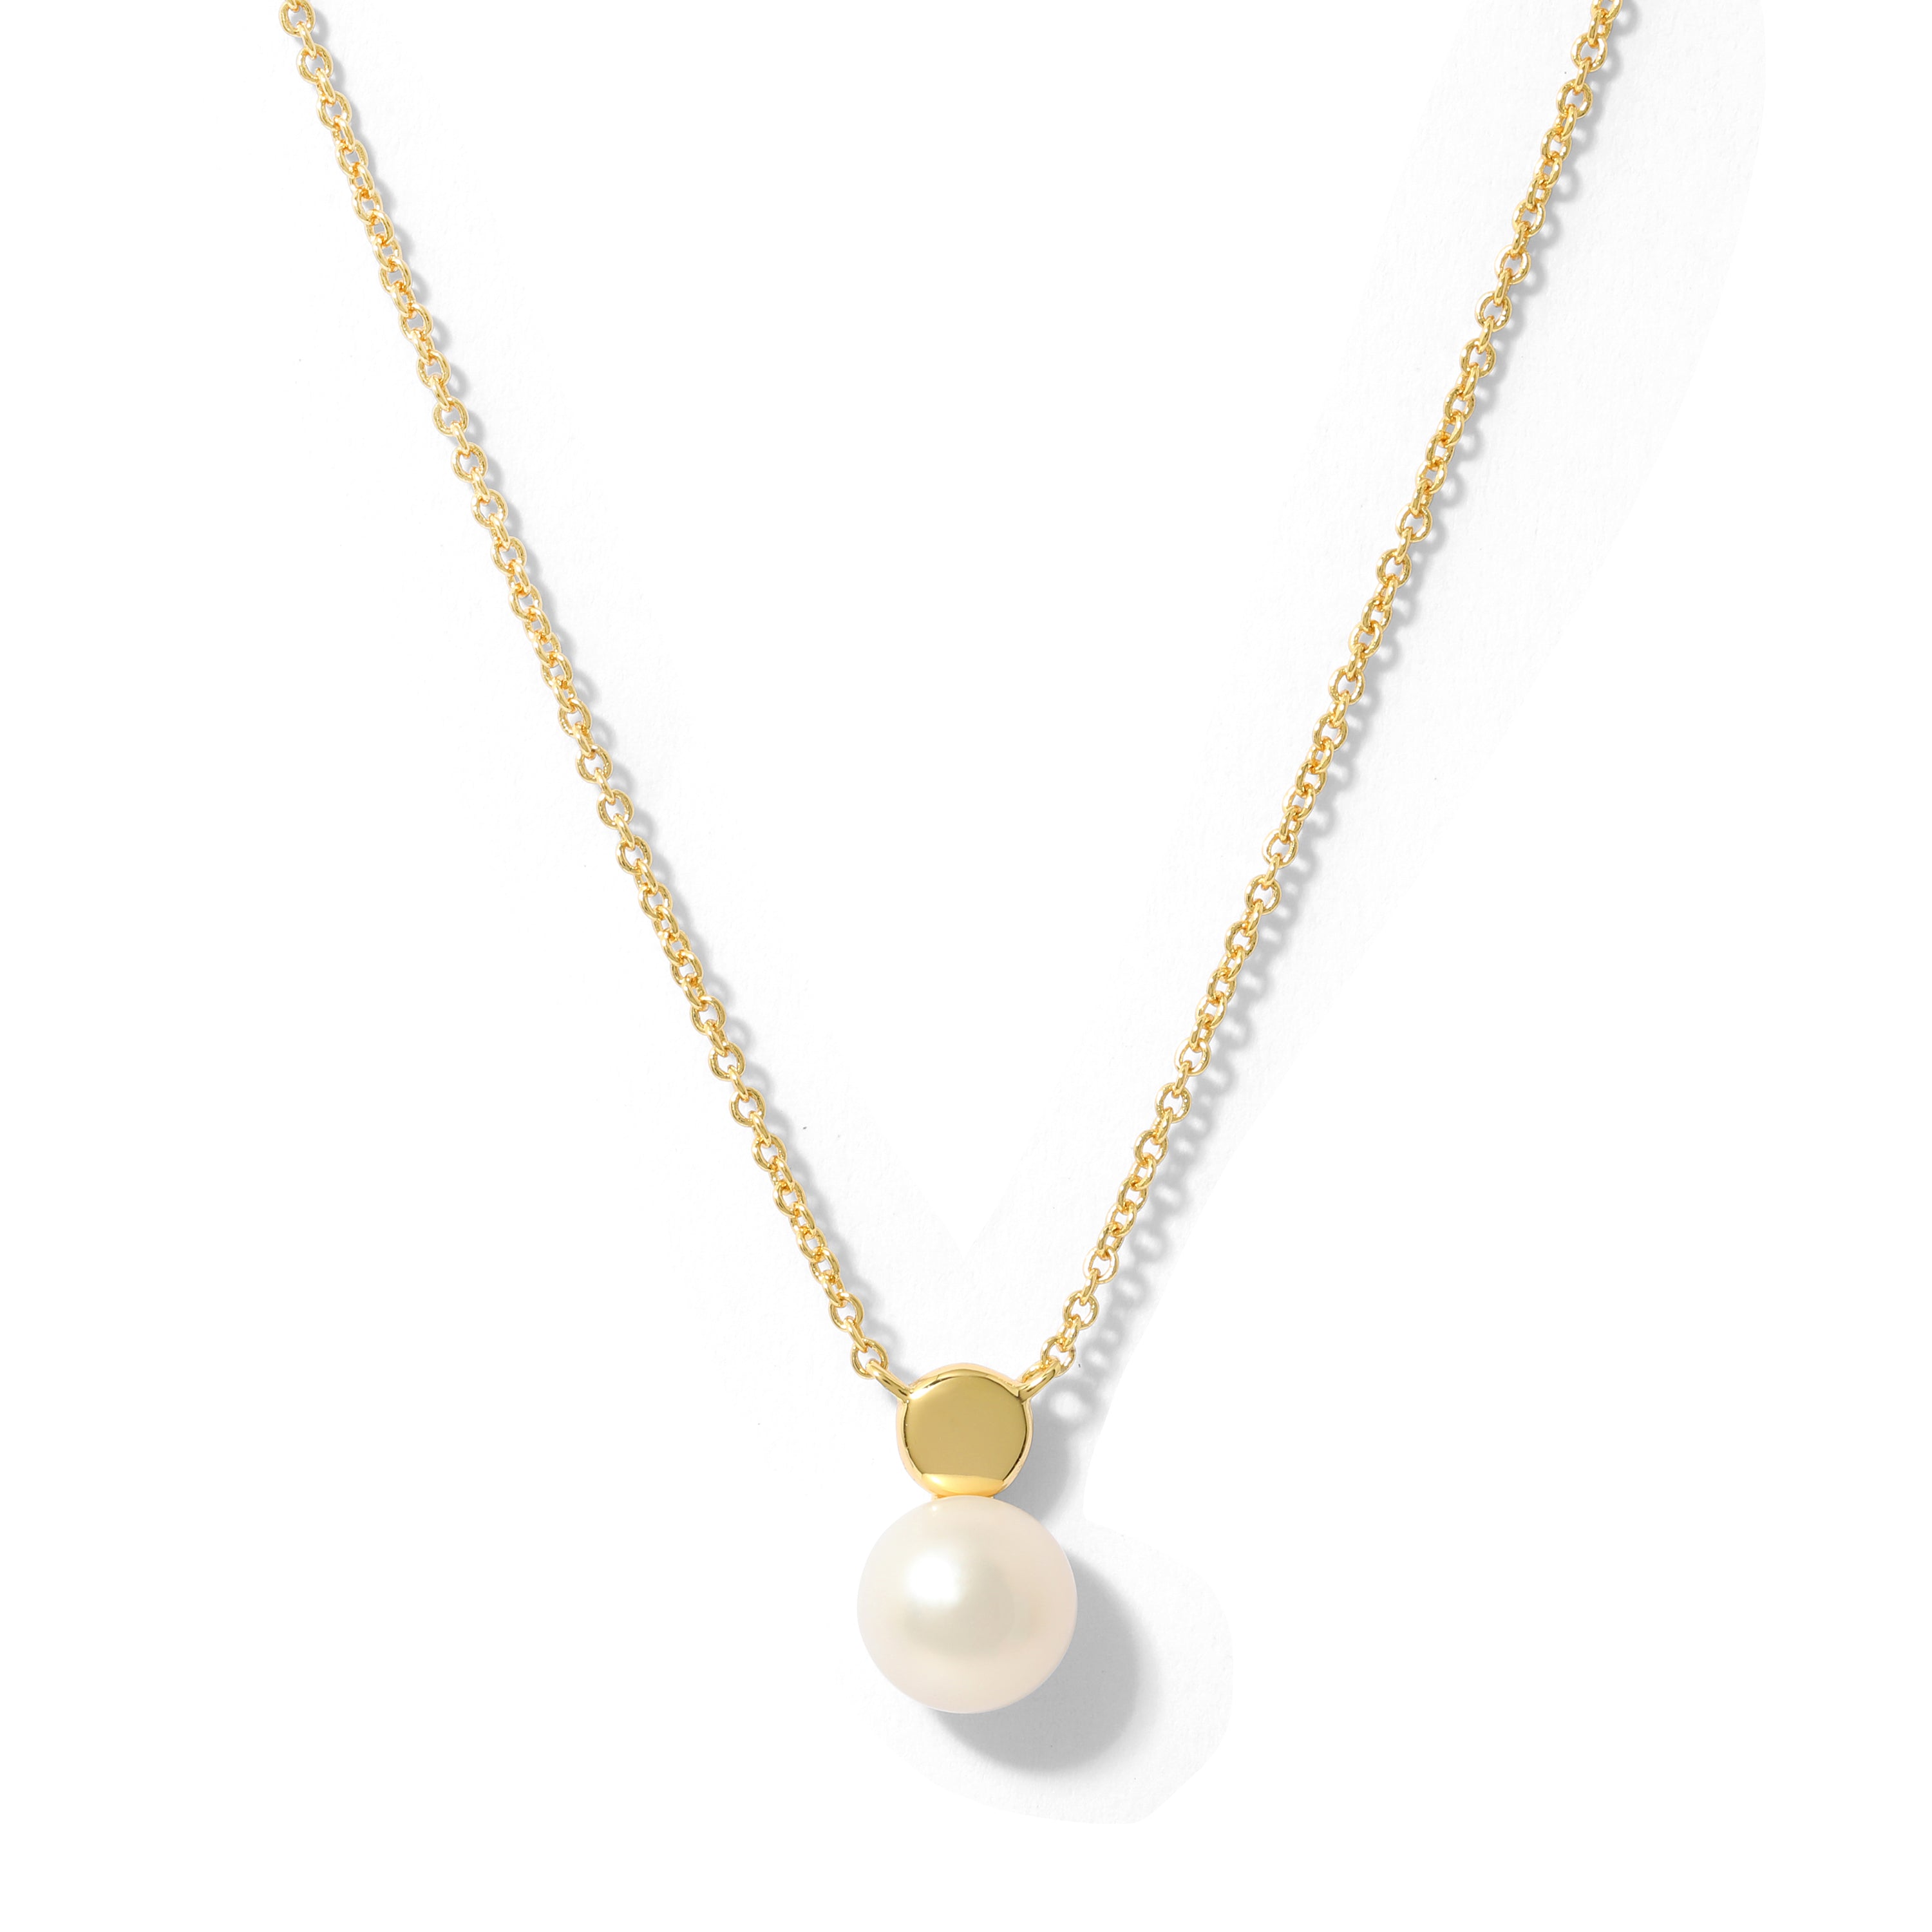 Elegant and minimalist gold necklace set with freshwater pearl.